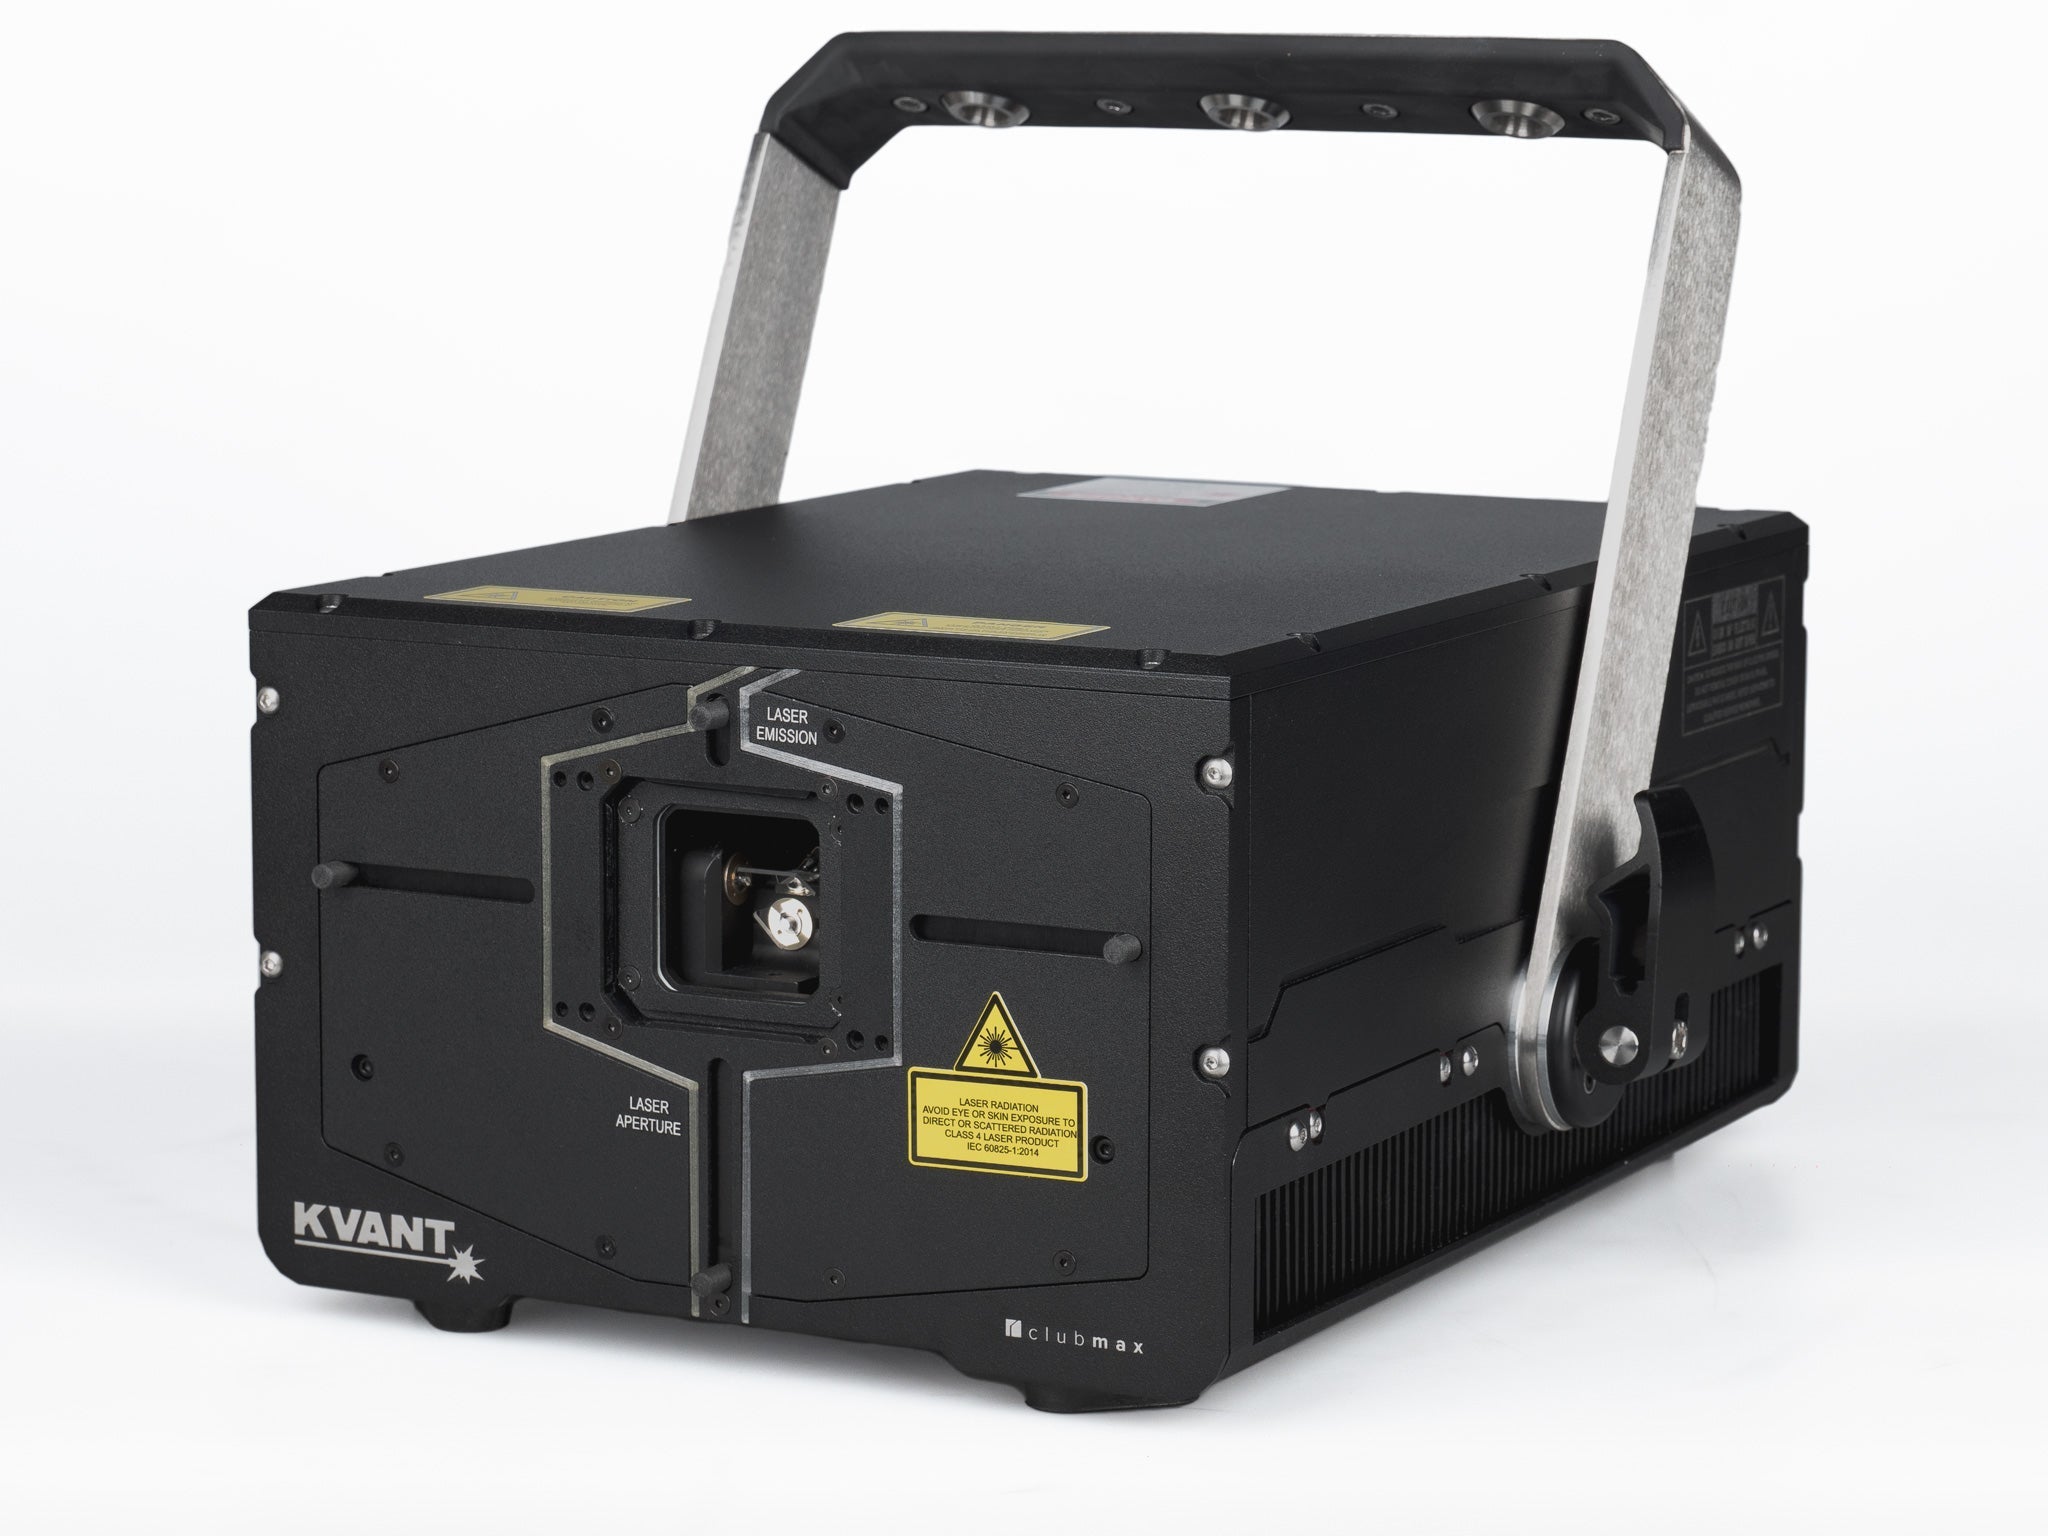 KVANT Clubmax 40 FB4 IP65 waterproof professional laser projector for outdoor shows_2